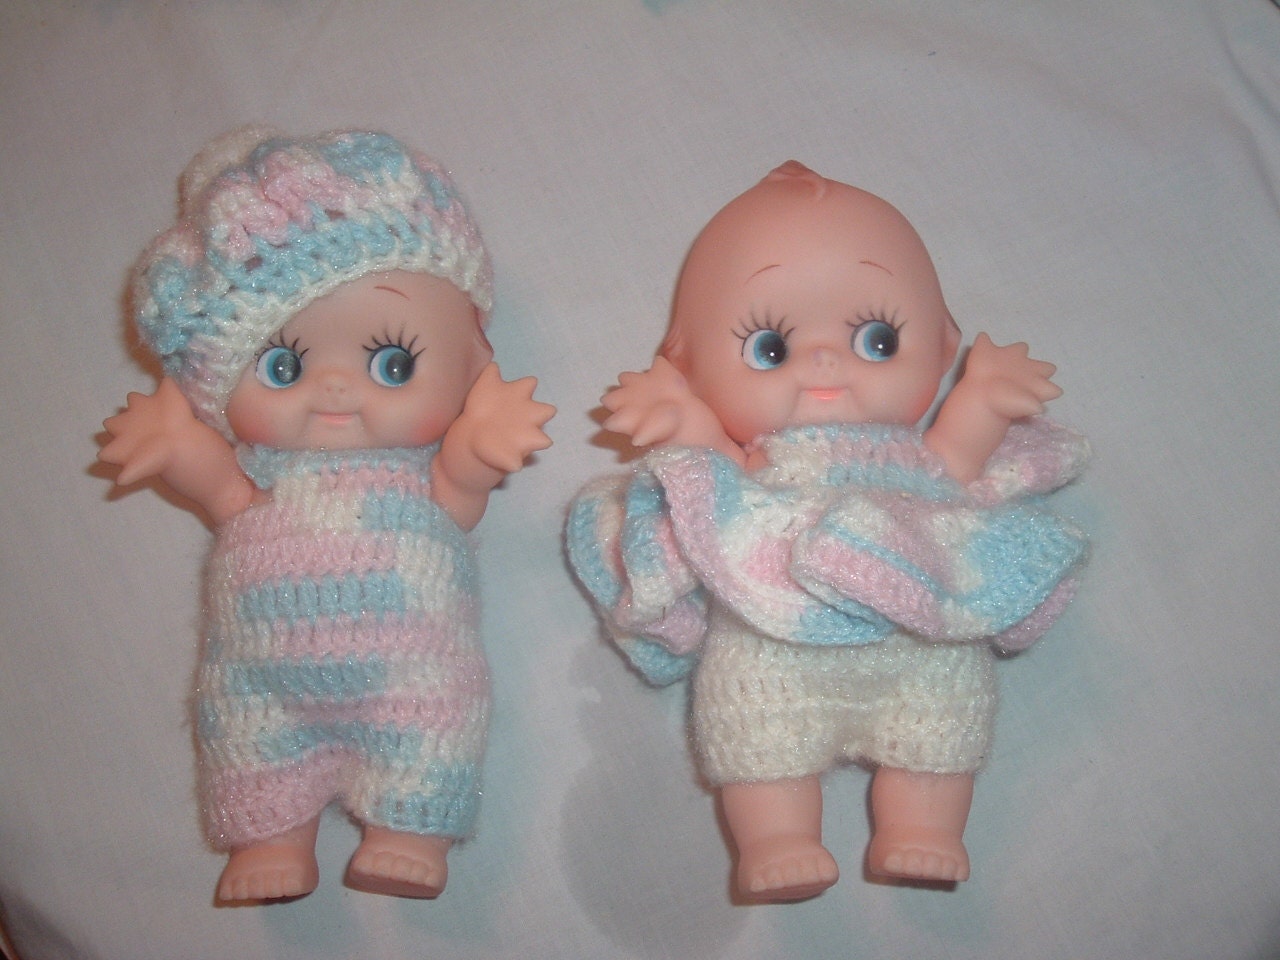 twin baby dolls with homemade crochet clothes - handymanhowto